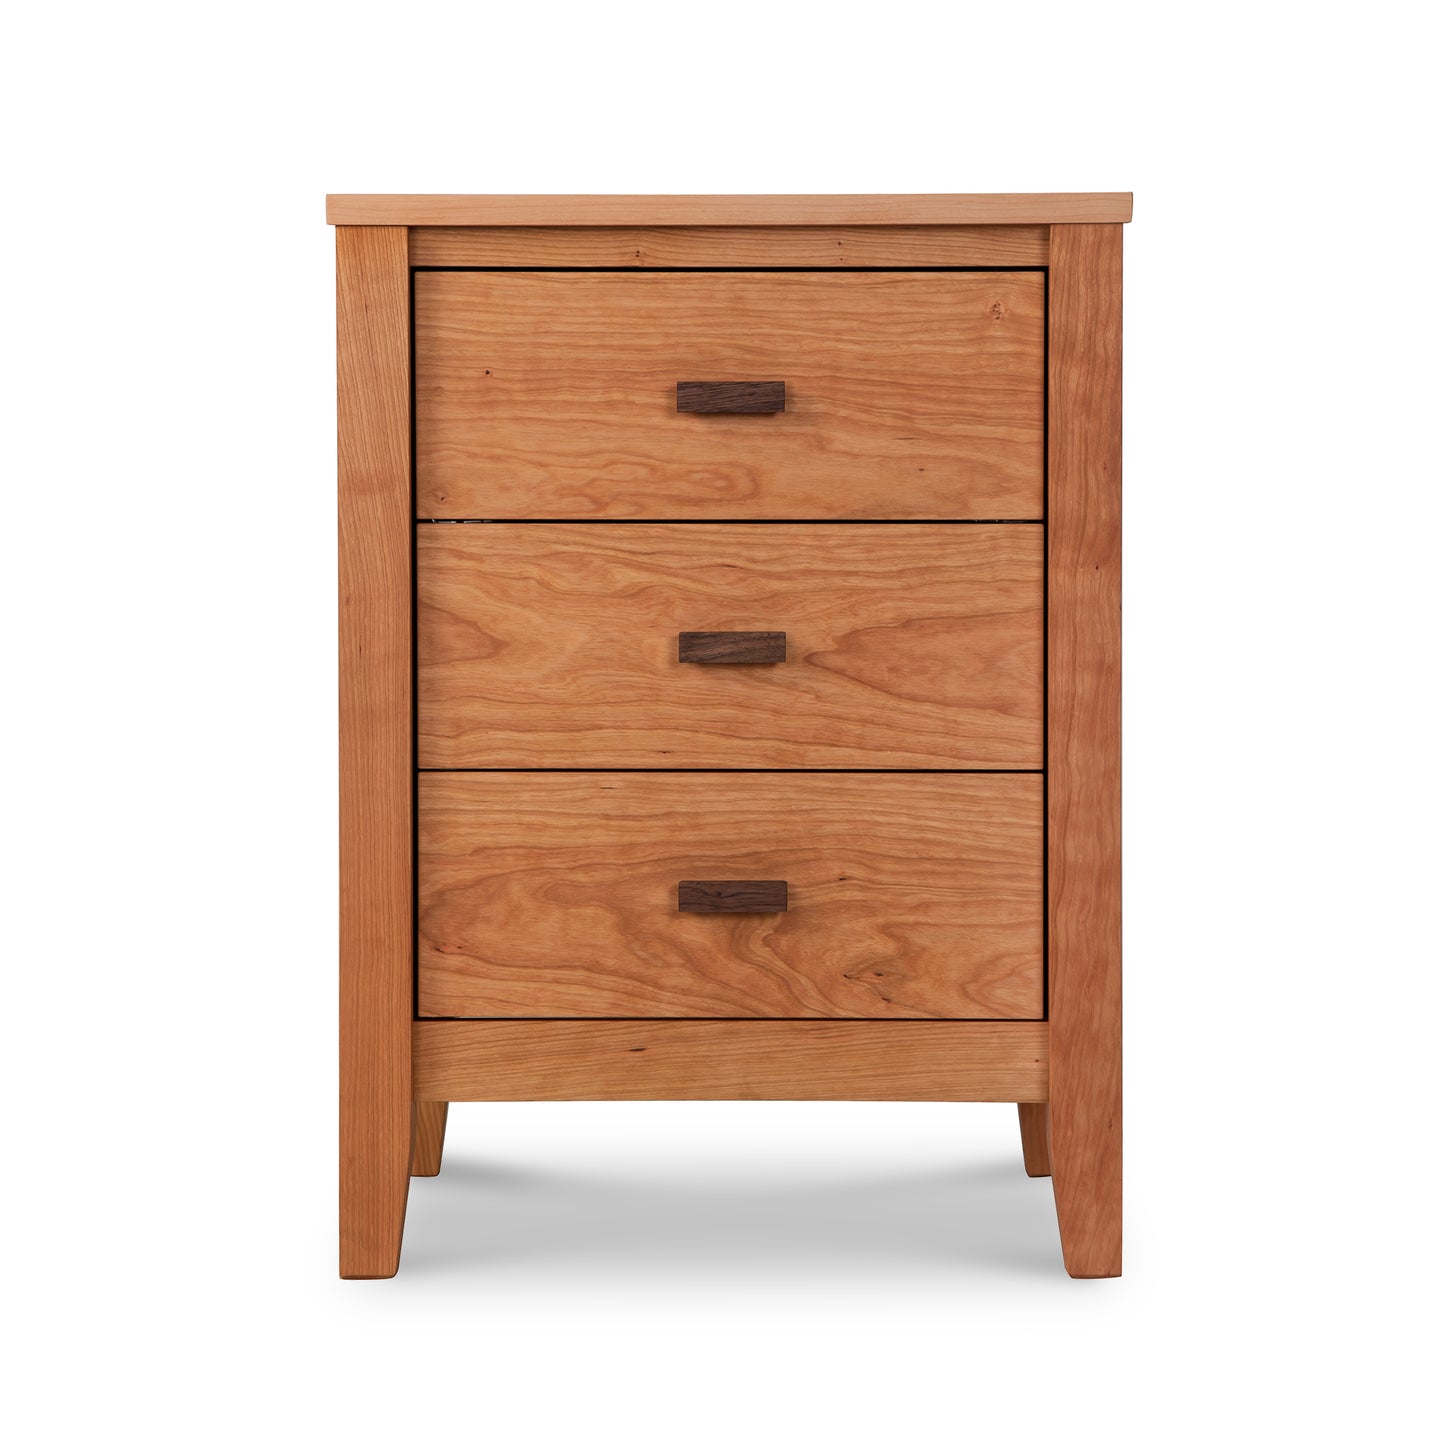 An Andover Modern 3-Drawer Nightstand handcrafted with Vermont craftsmanship, featuring three drawers and a wooden design by Maple Corner Woodworks.